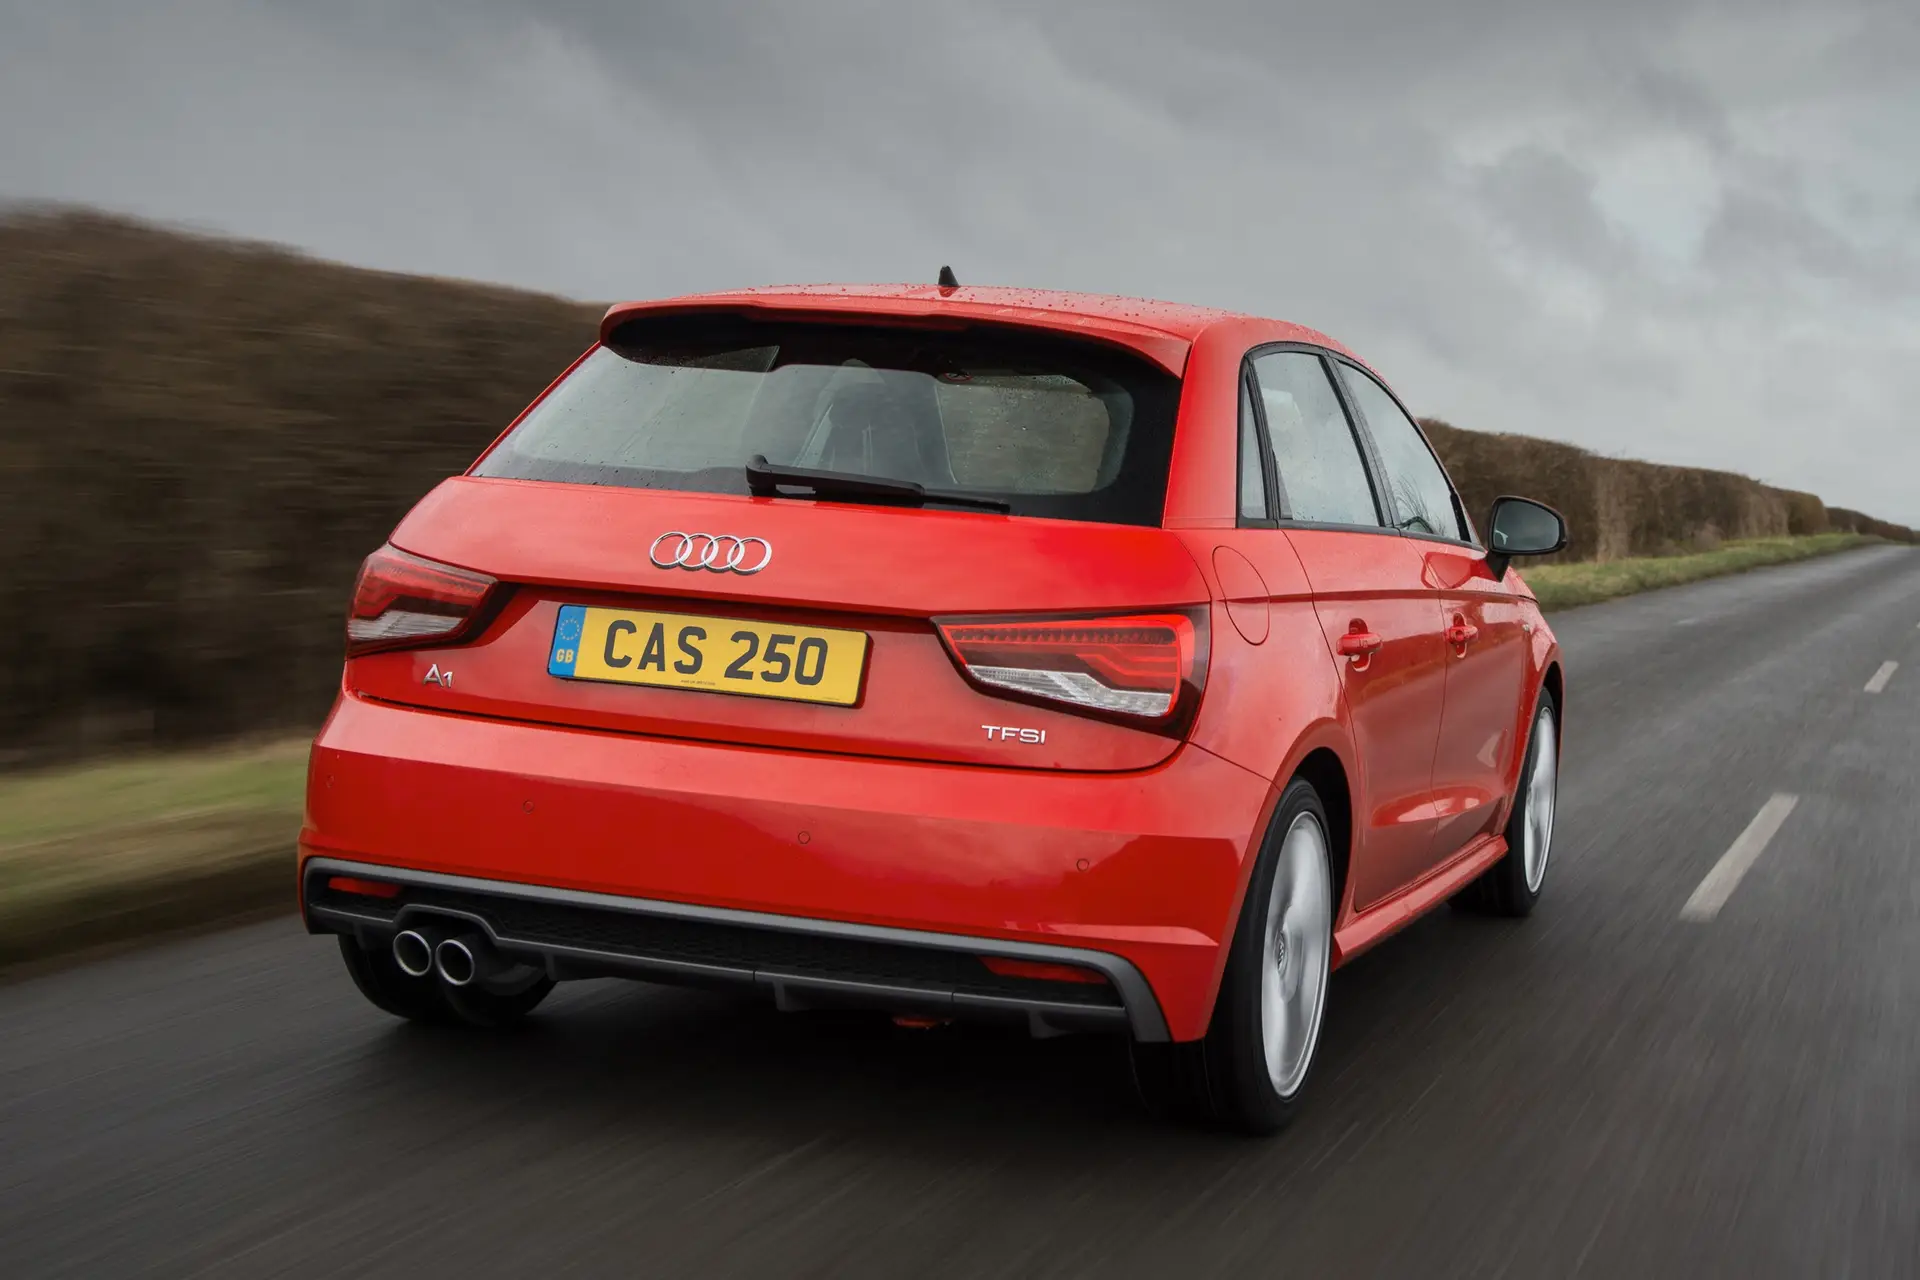 Used Audi A1 Sportback (2012 – 2018) Review: Driving Back